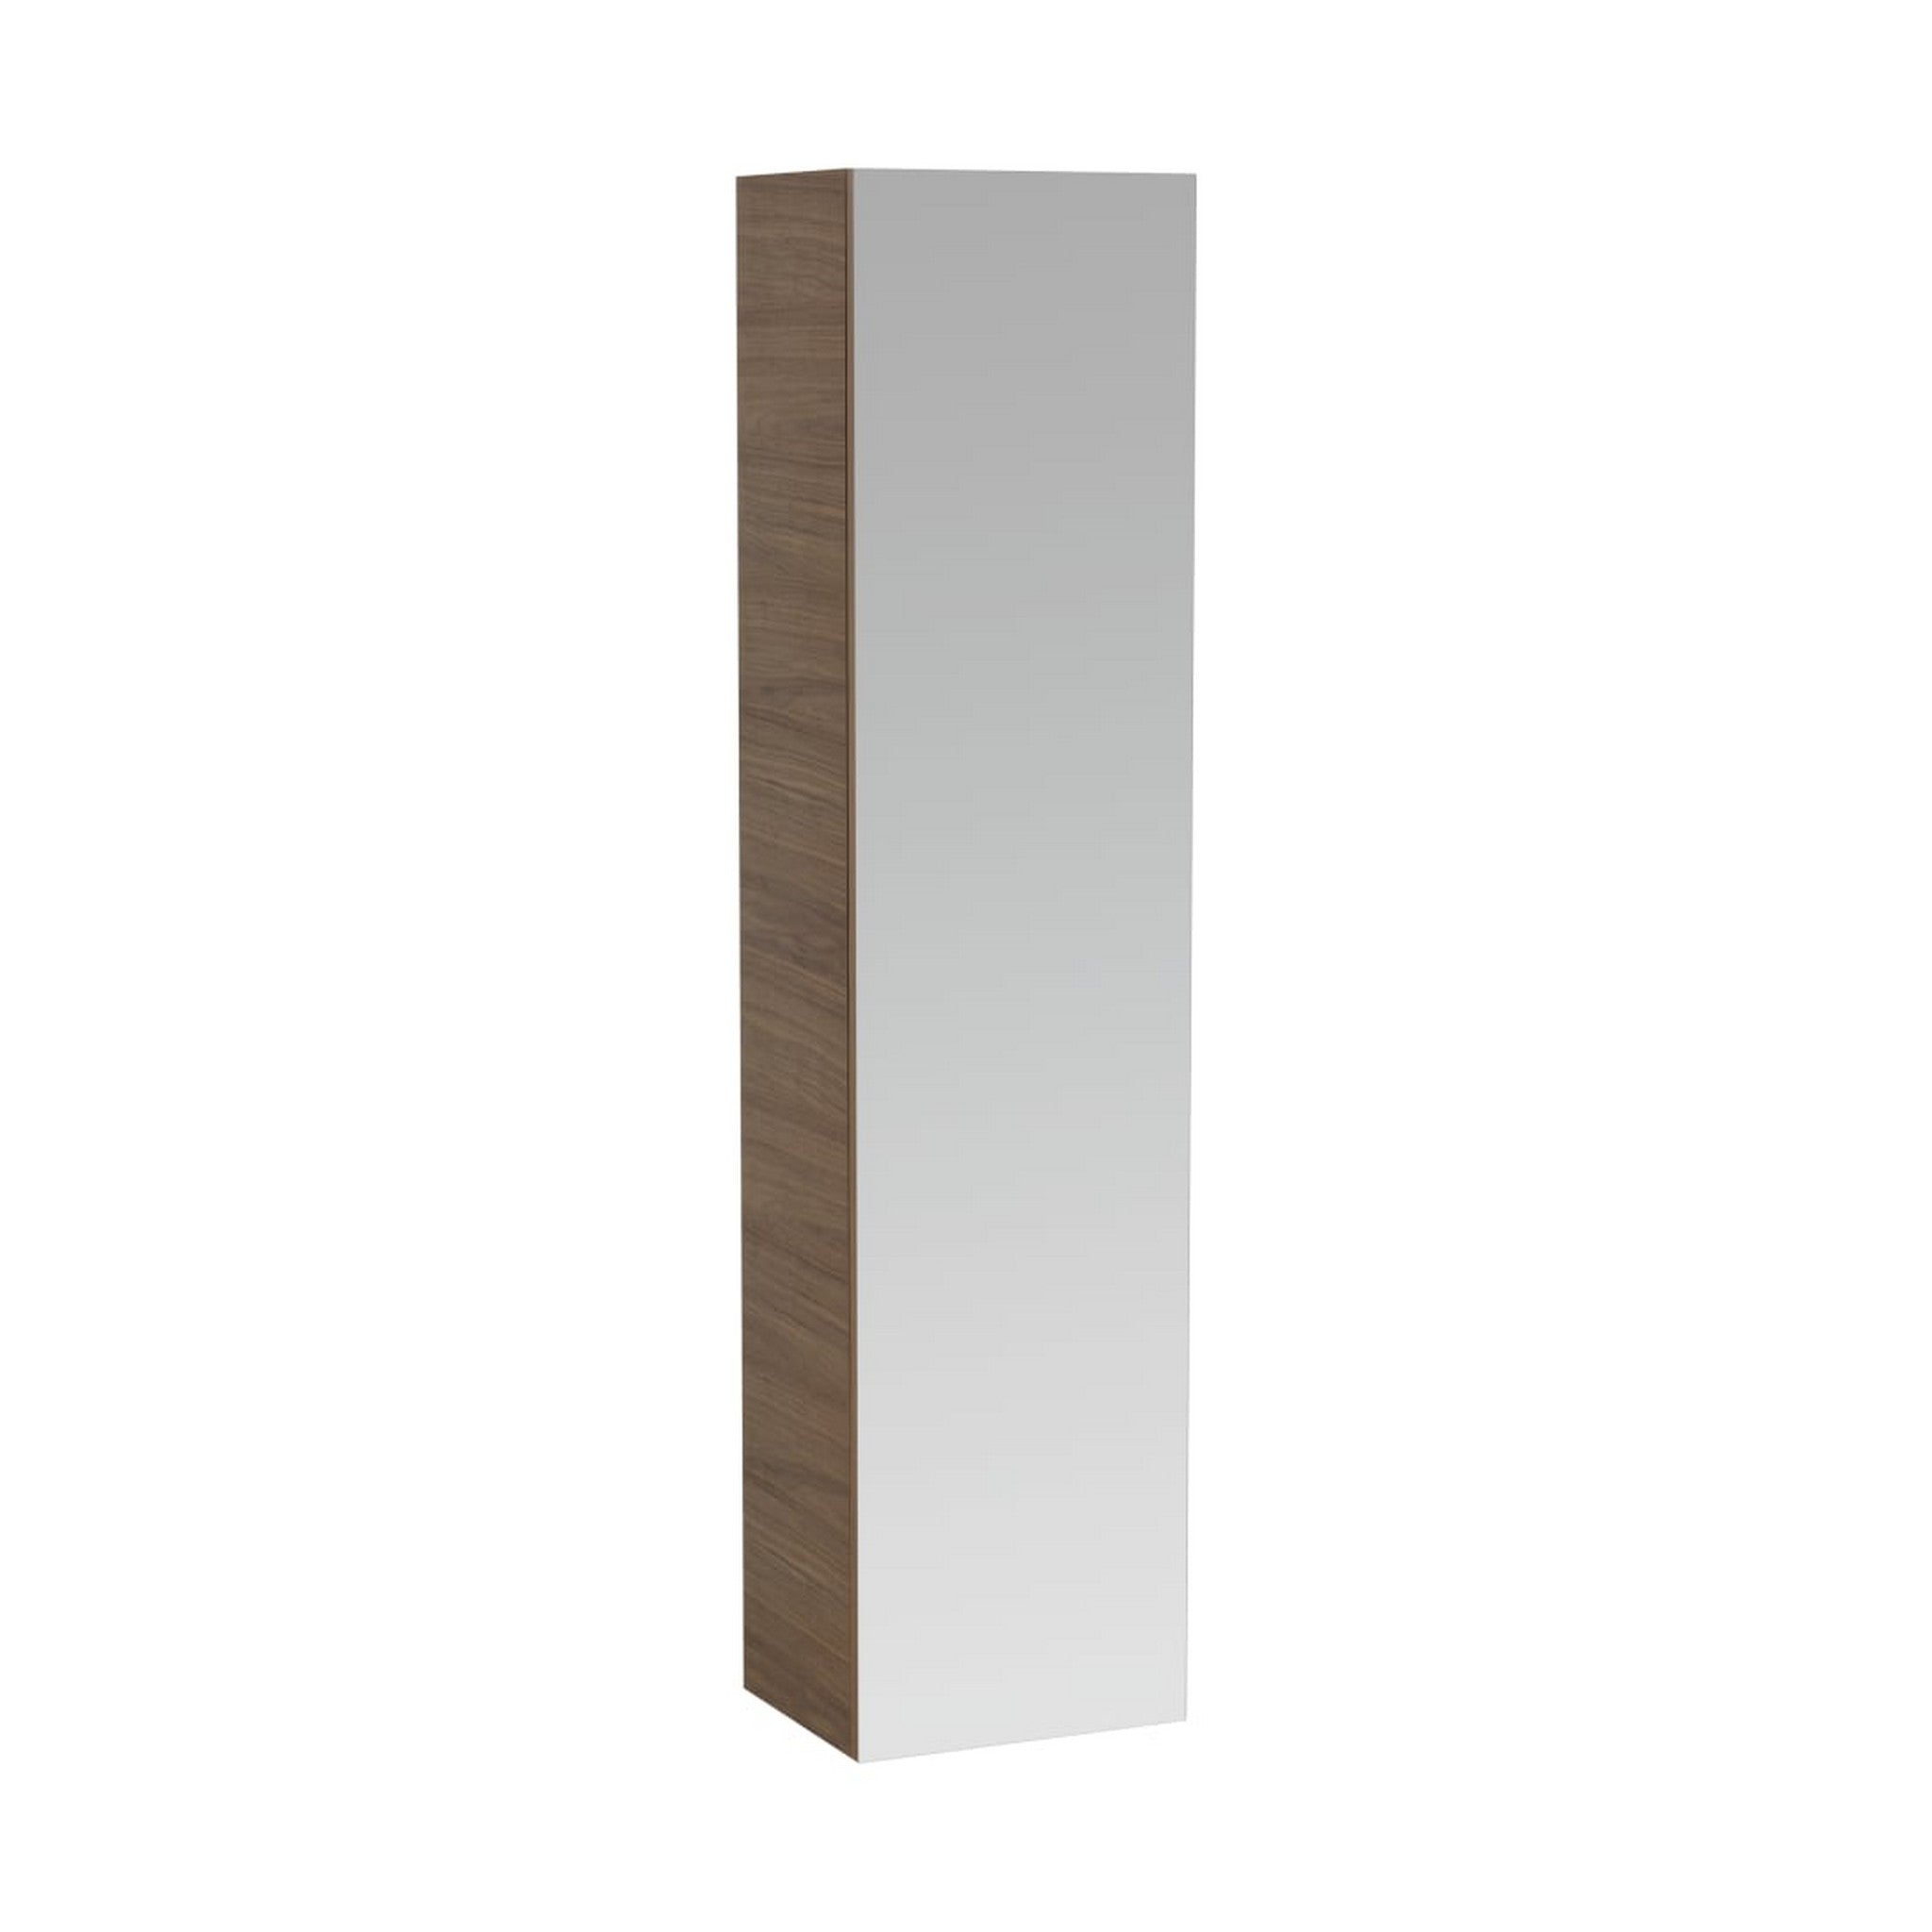 Laufen, Laufen IlBagnoAlessi 16" x 67" Walnut Wall-Mounted Left-Hinged Tall Cabinet With Mirrored Door and 4 Glass Shelves